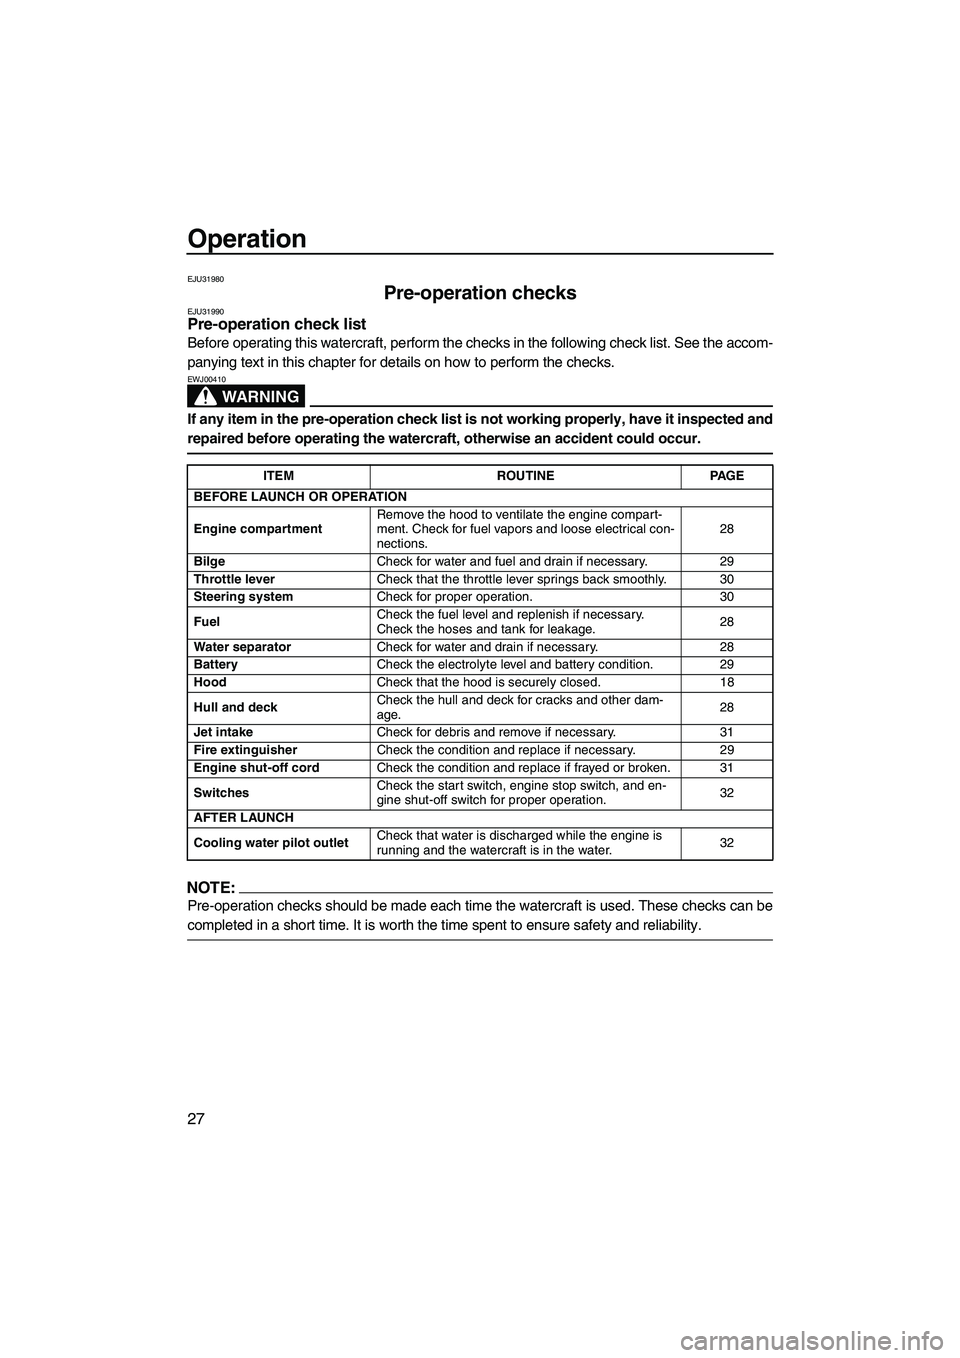 YAMAHA SUPERJET 2007  Owners Manual Operation
27
EJU31980
Pre-operation checks EJU31990Pre-operation check list 
Before operating this watercraft, perform the checks in the following check list. See the accom-
panying text in this chapt